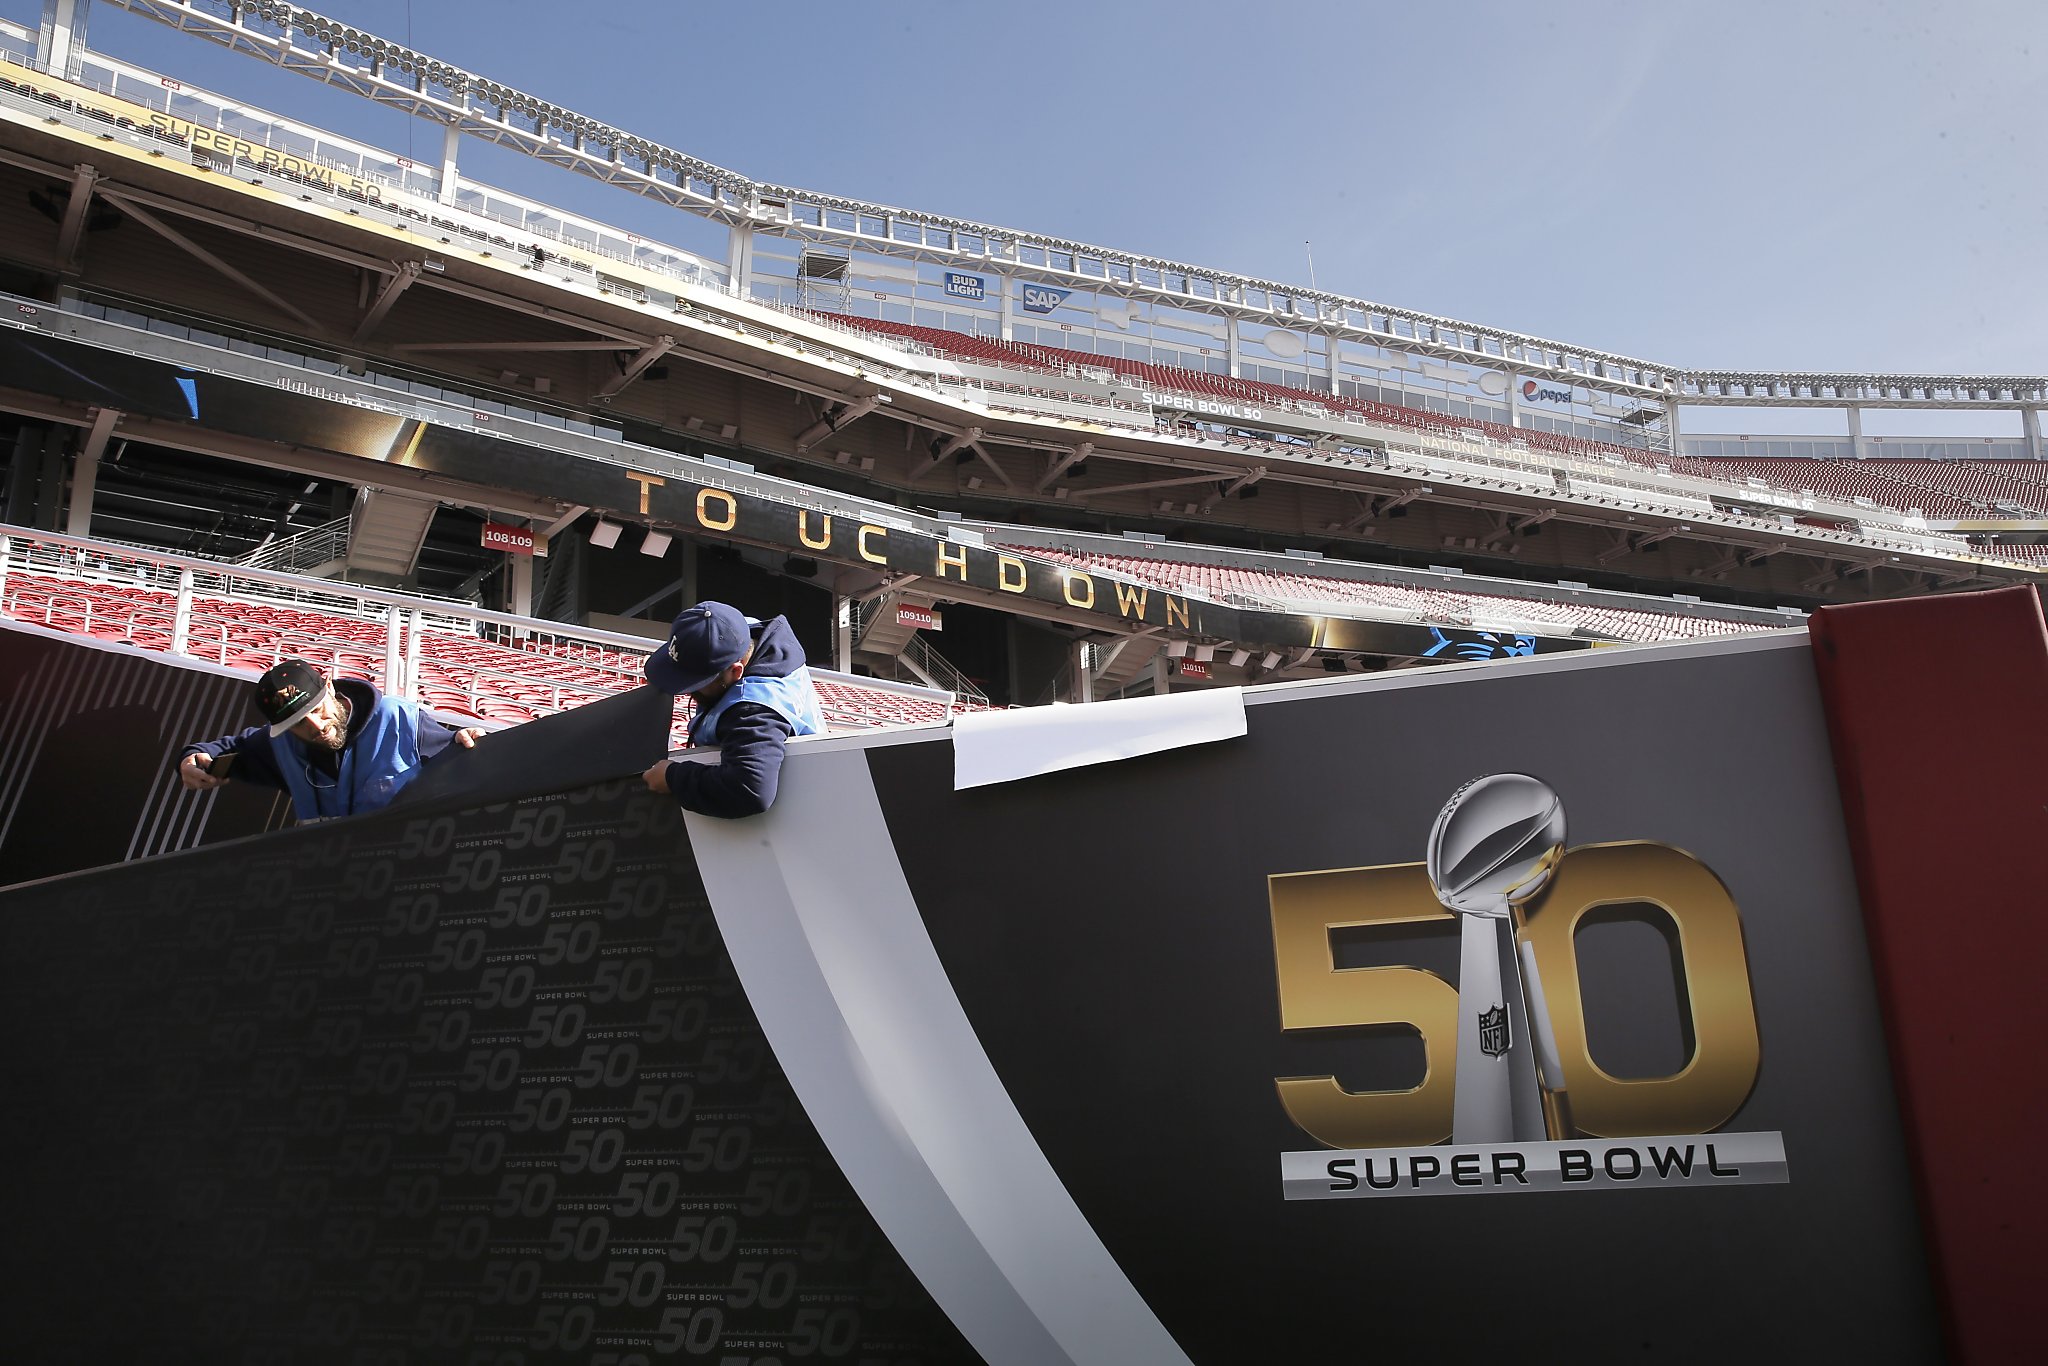 NFL gives sneak peek at Levi's Stadium tricked out for Super Bowl